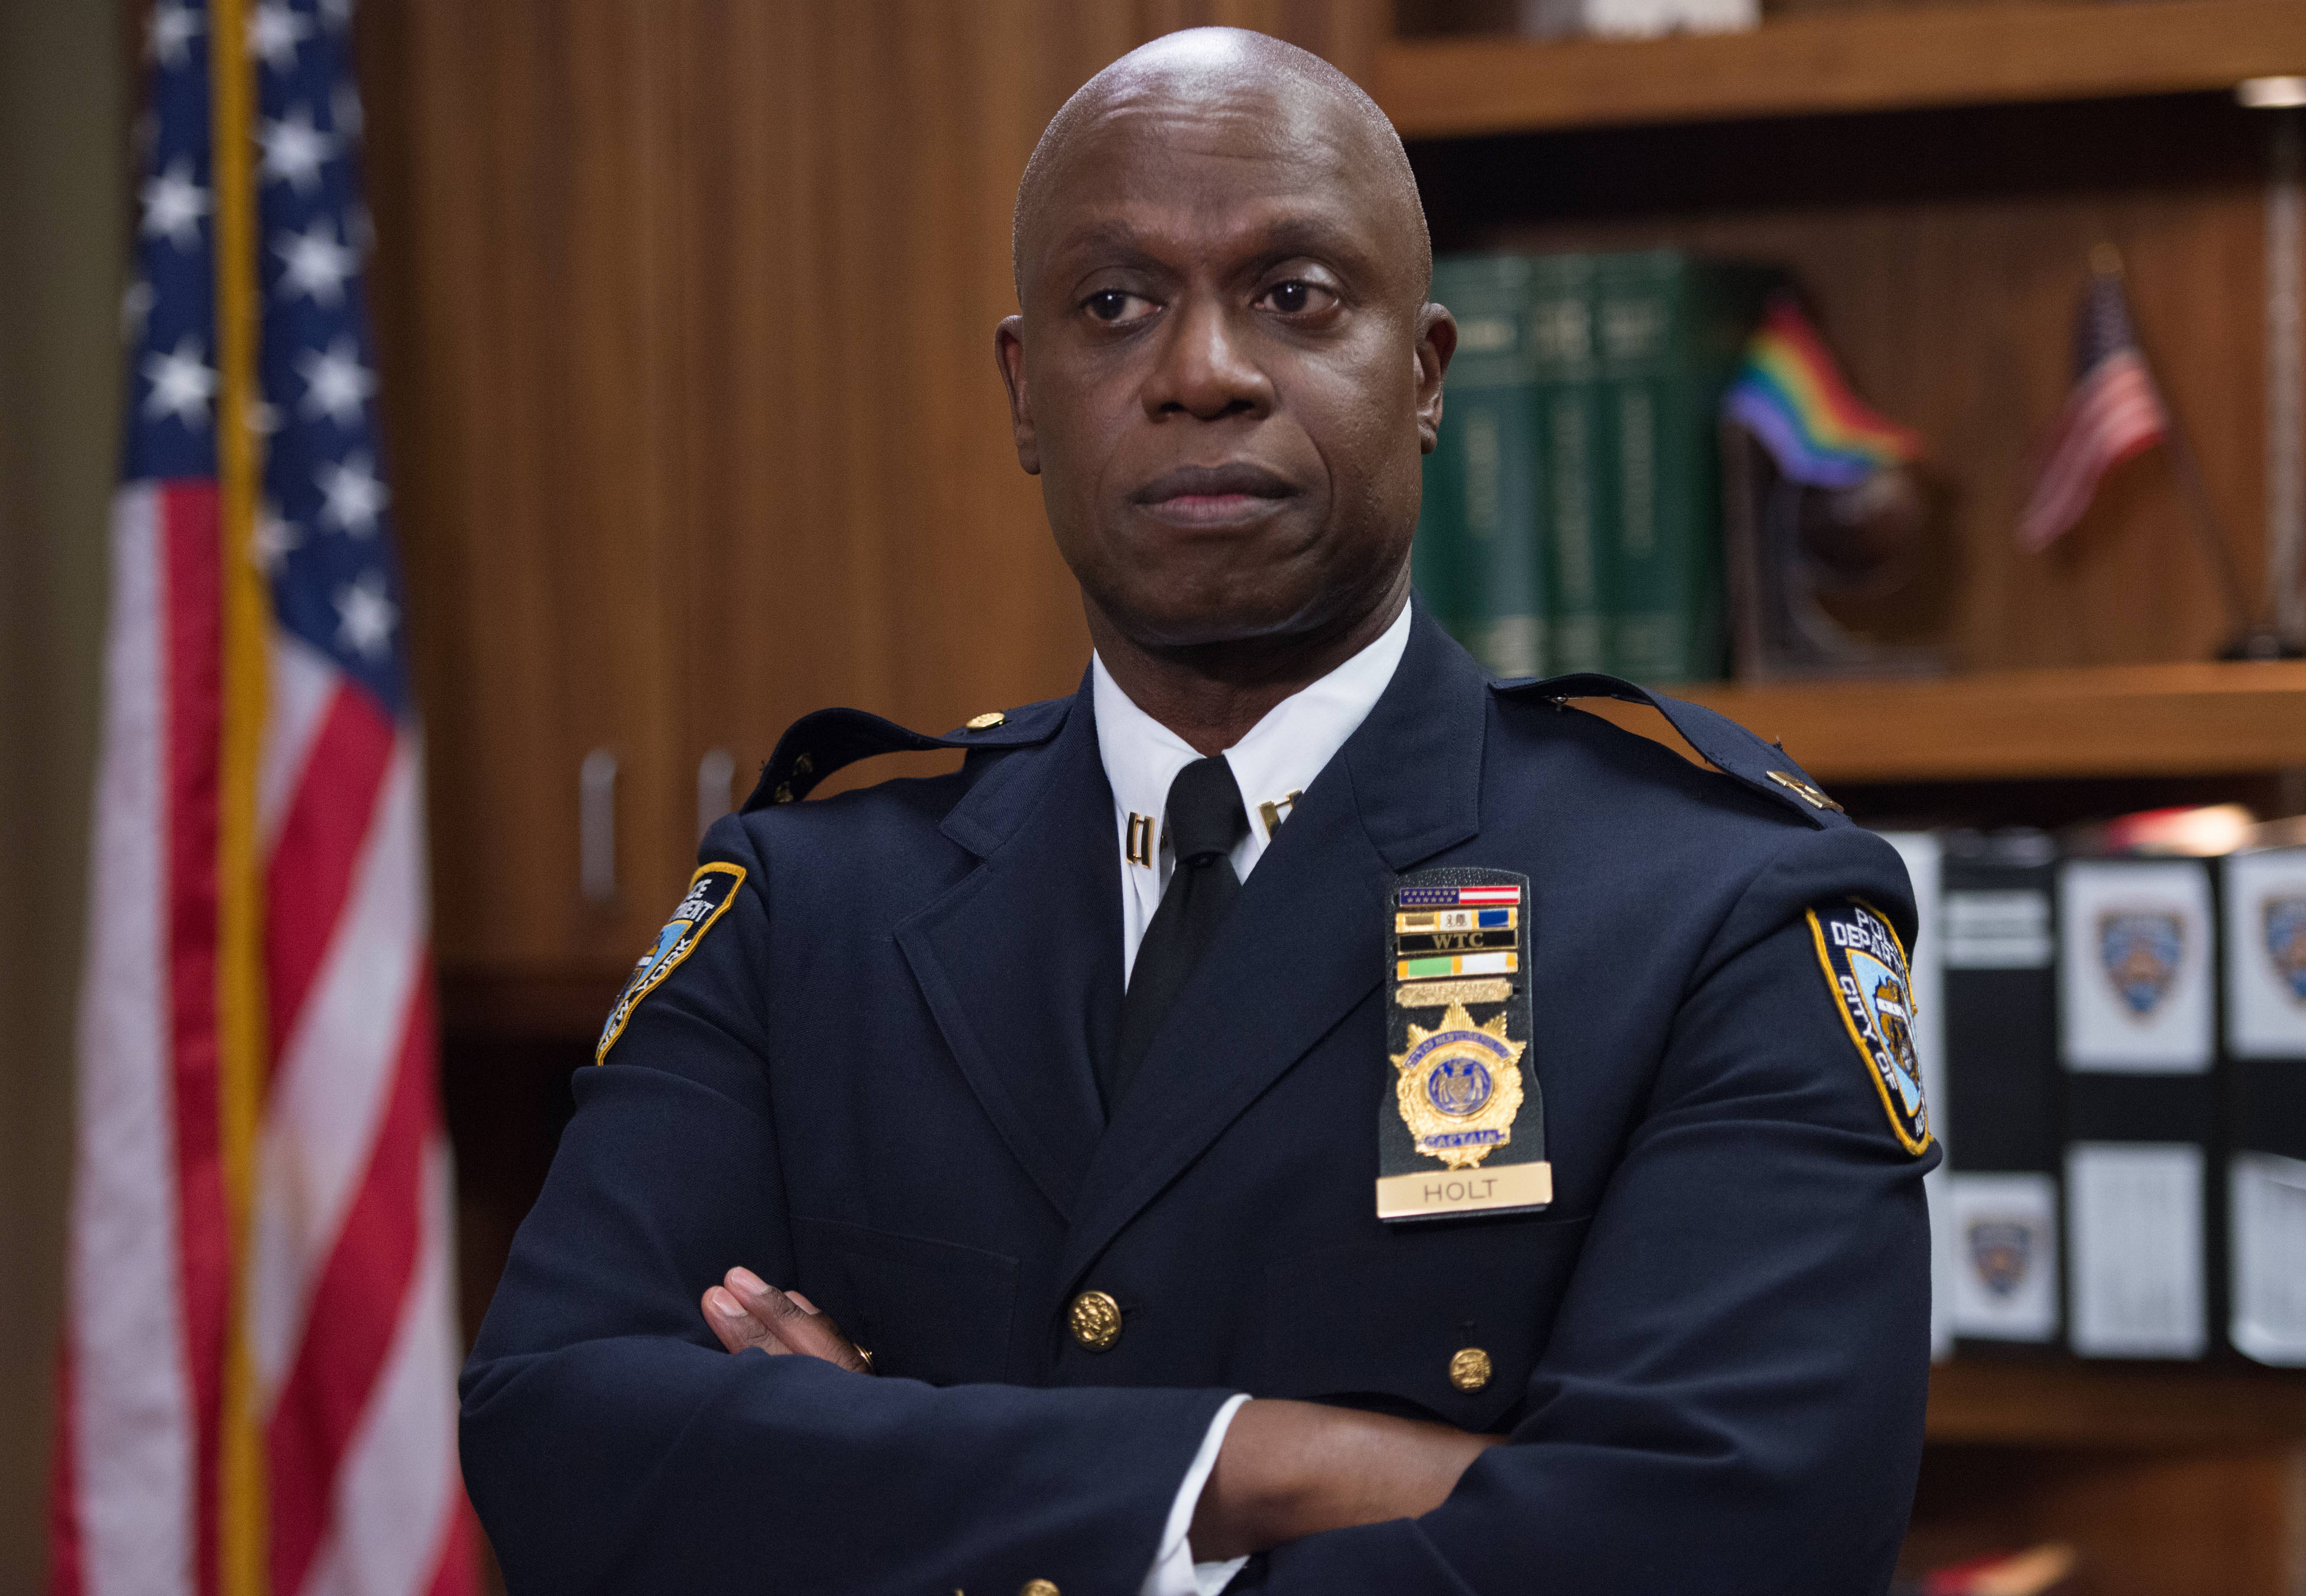 Andre Braugher The Good Fight Ri'Chard Lane Leather Jacket